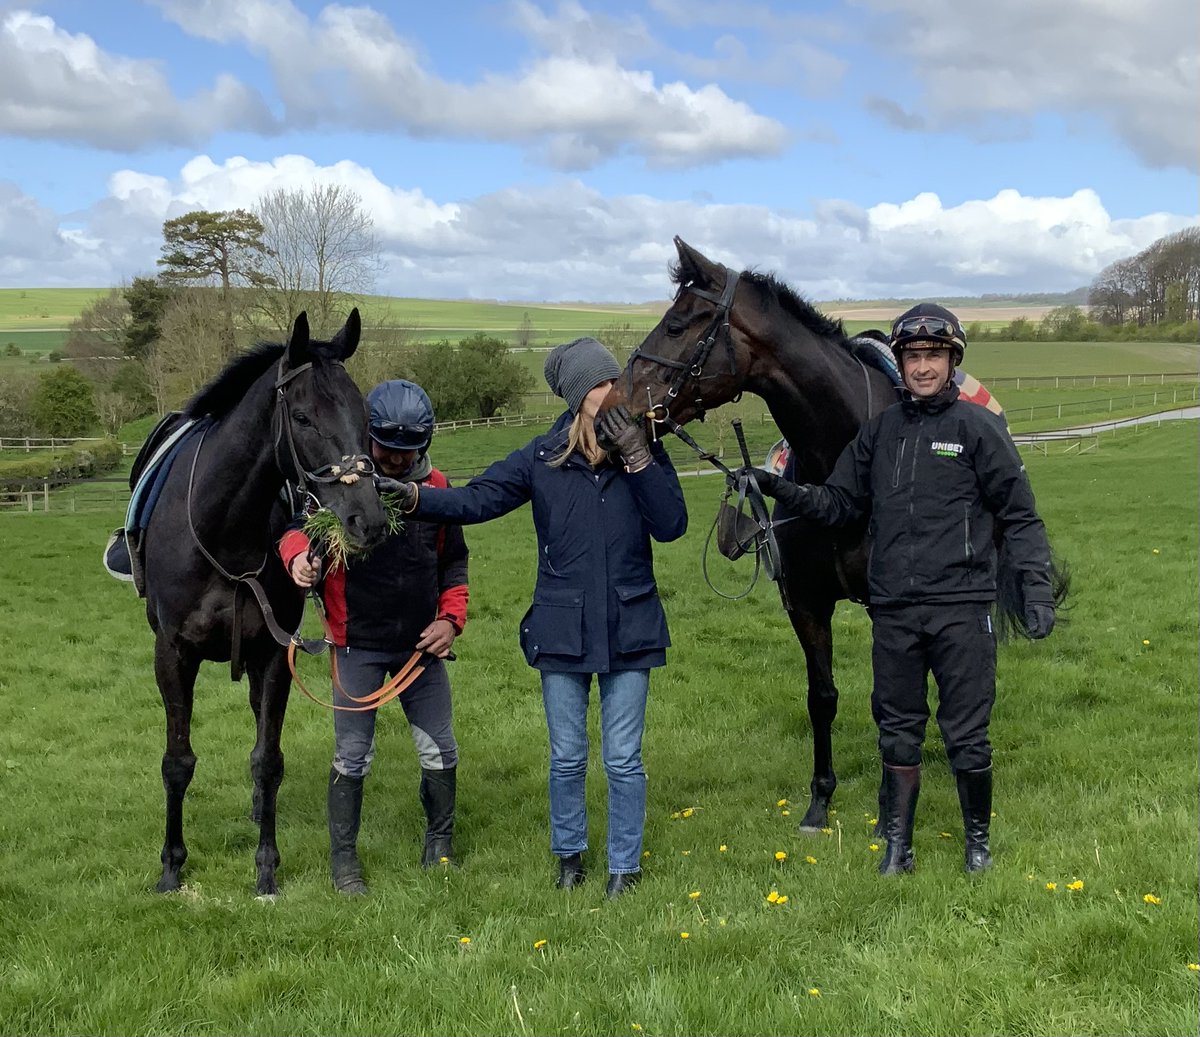 I had the very best of mornings yesterday at Seven Barrows catching up with my all time favourite Bhaloo 🐻and our very beautiful young filly Owl 🦉. Gorgeous day for it too! Thank you guys @sevenbarrows